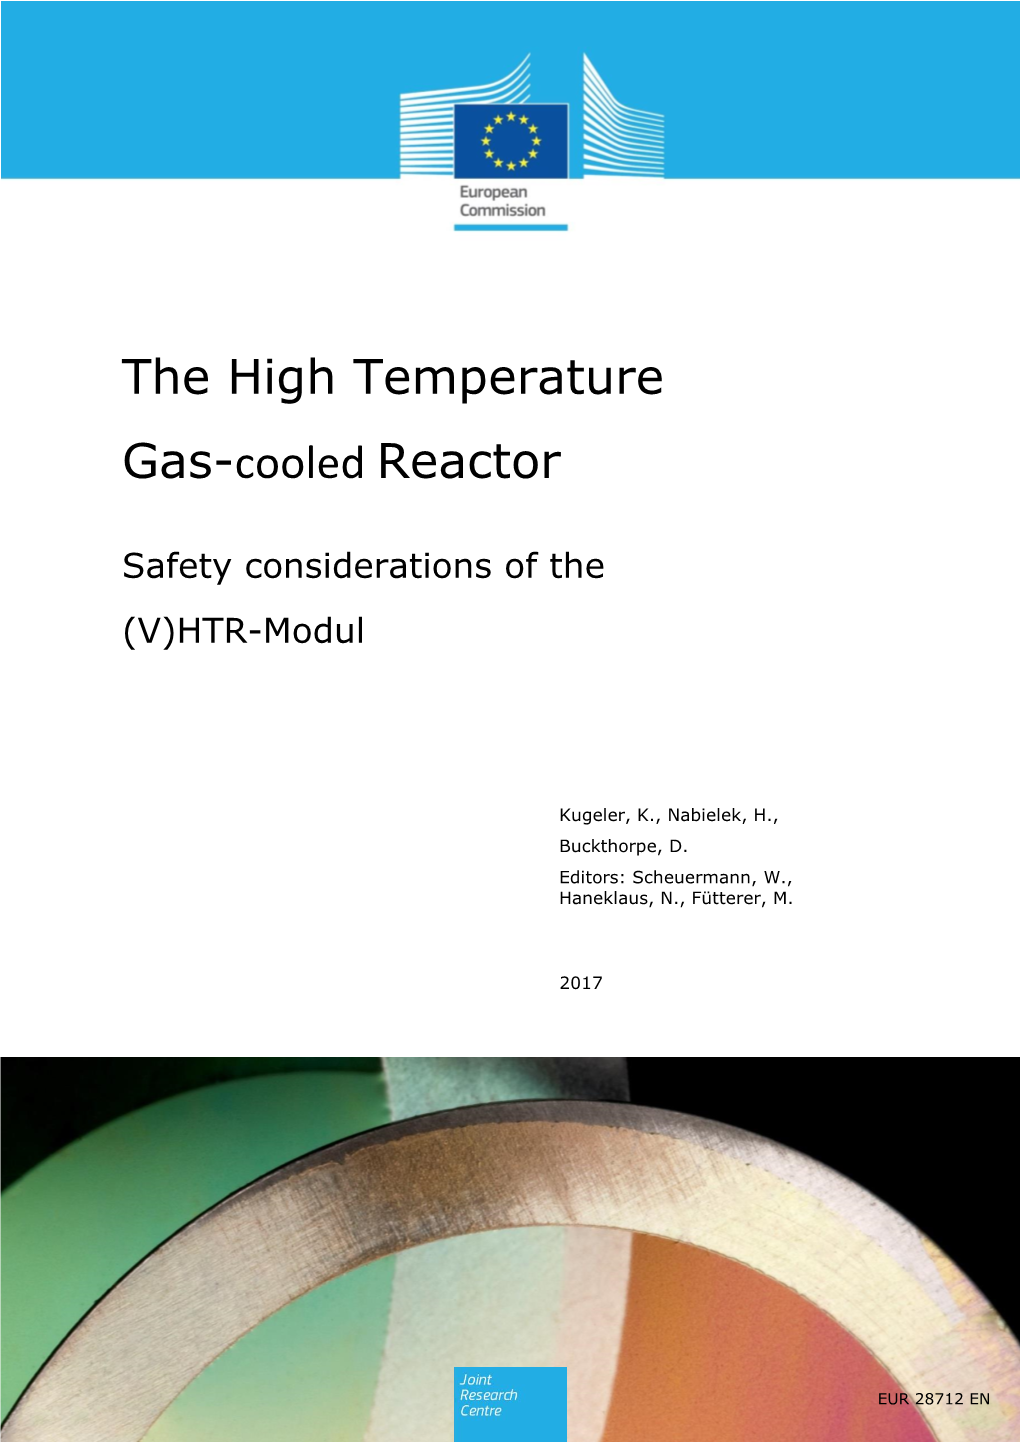 The High Temperature Gas-Cooled Reactor